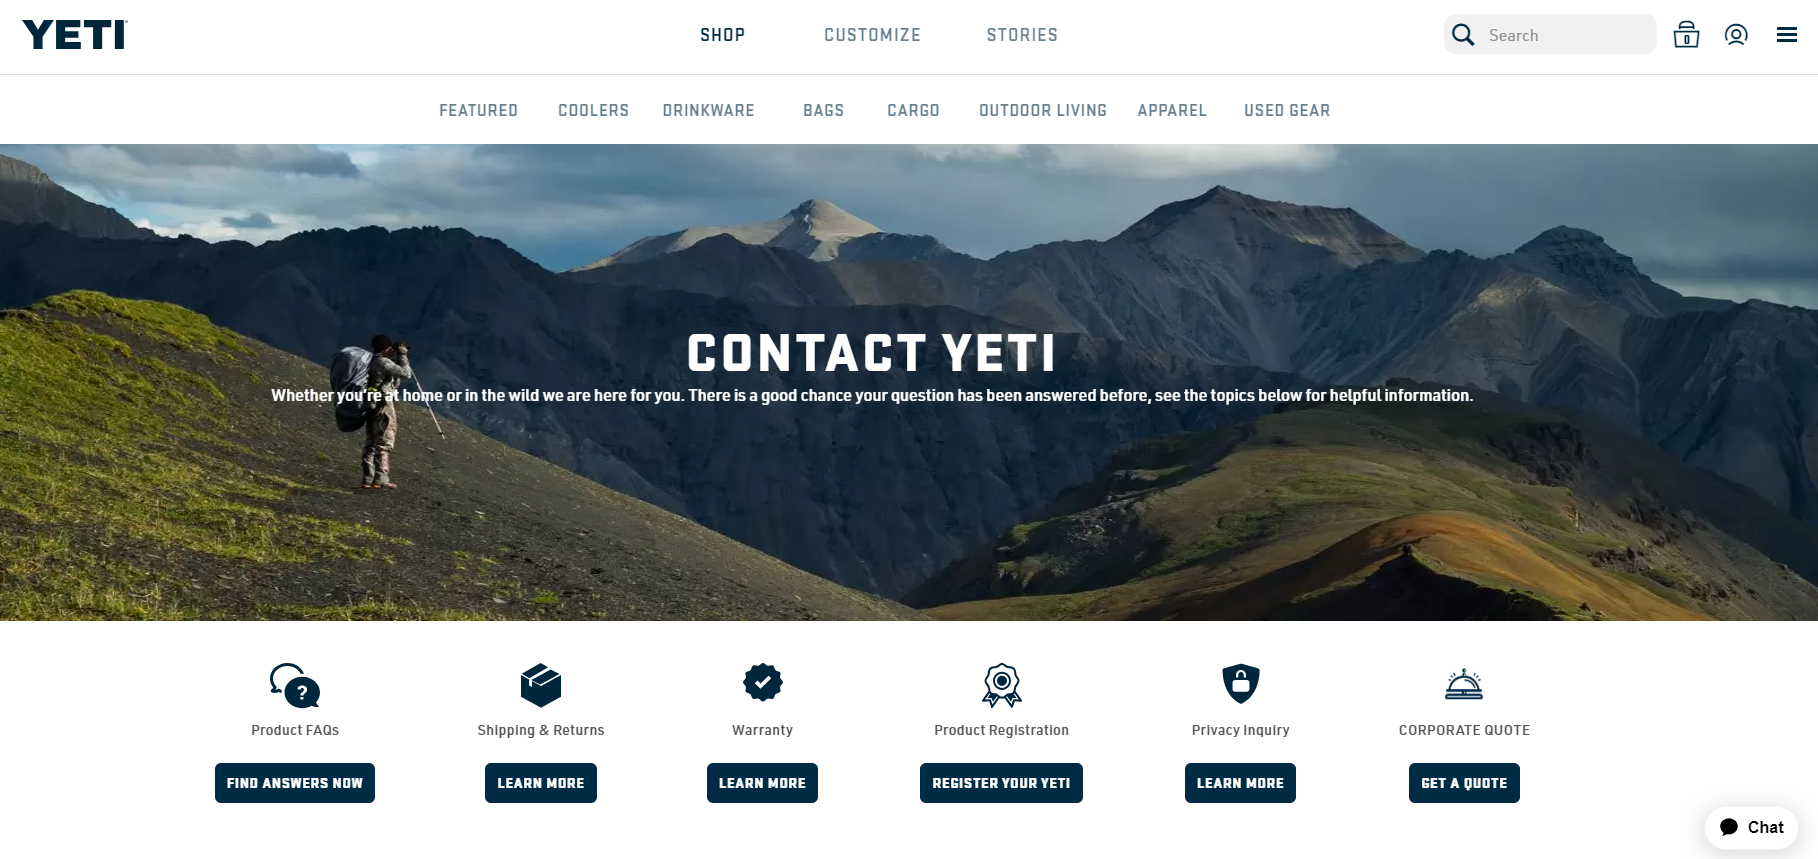 yeti contact us 02.24 65cd0ecc3a908 sej - Contact Us Page Examples: 44 Designs For Inspiration